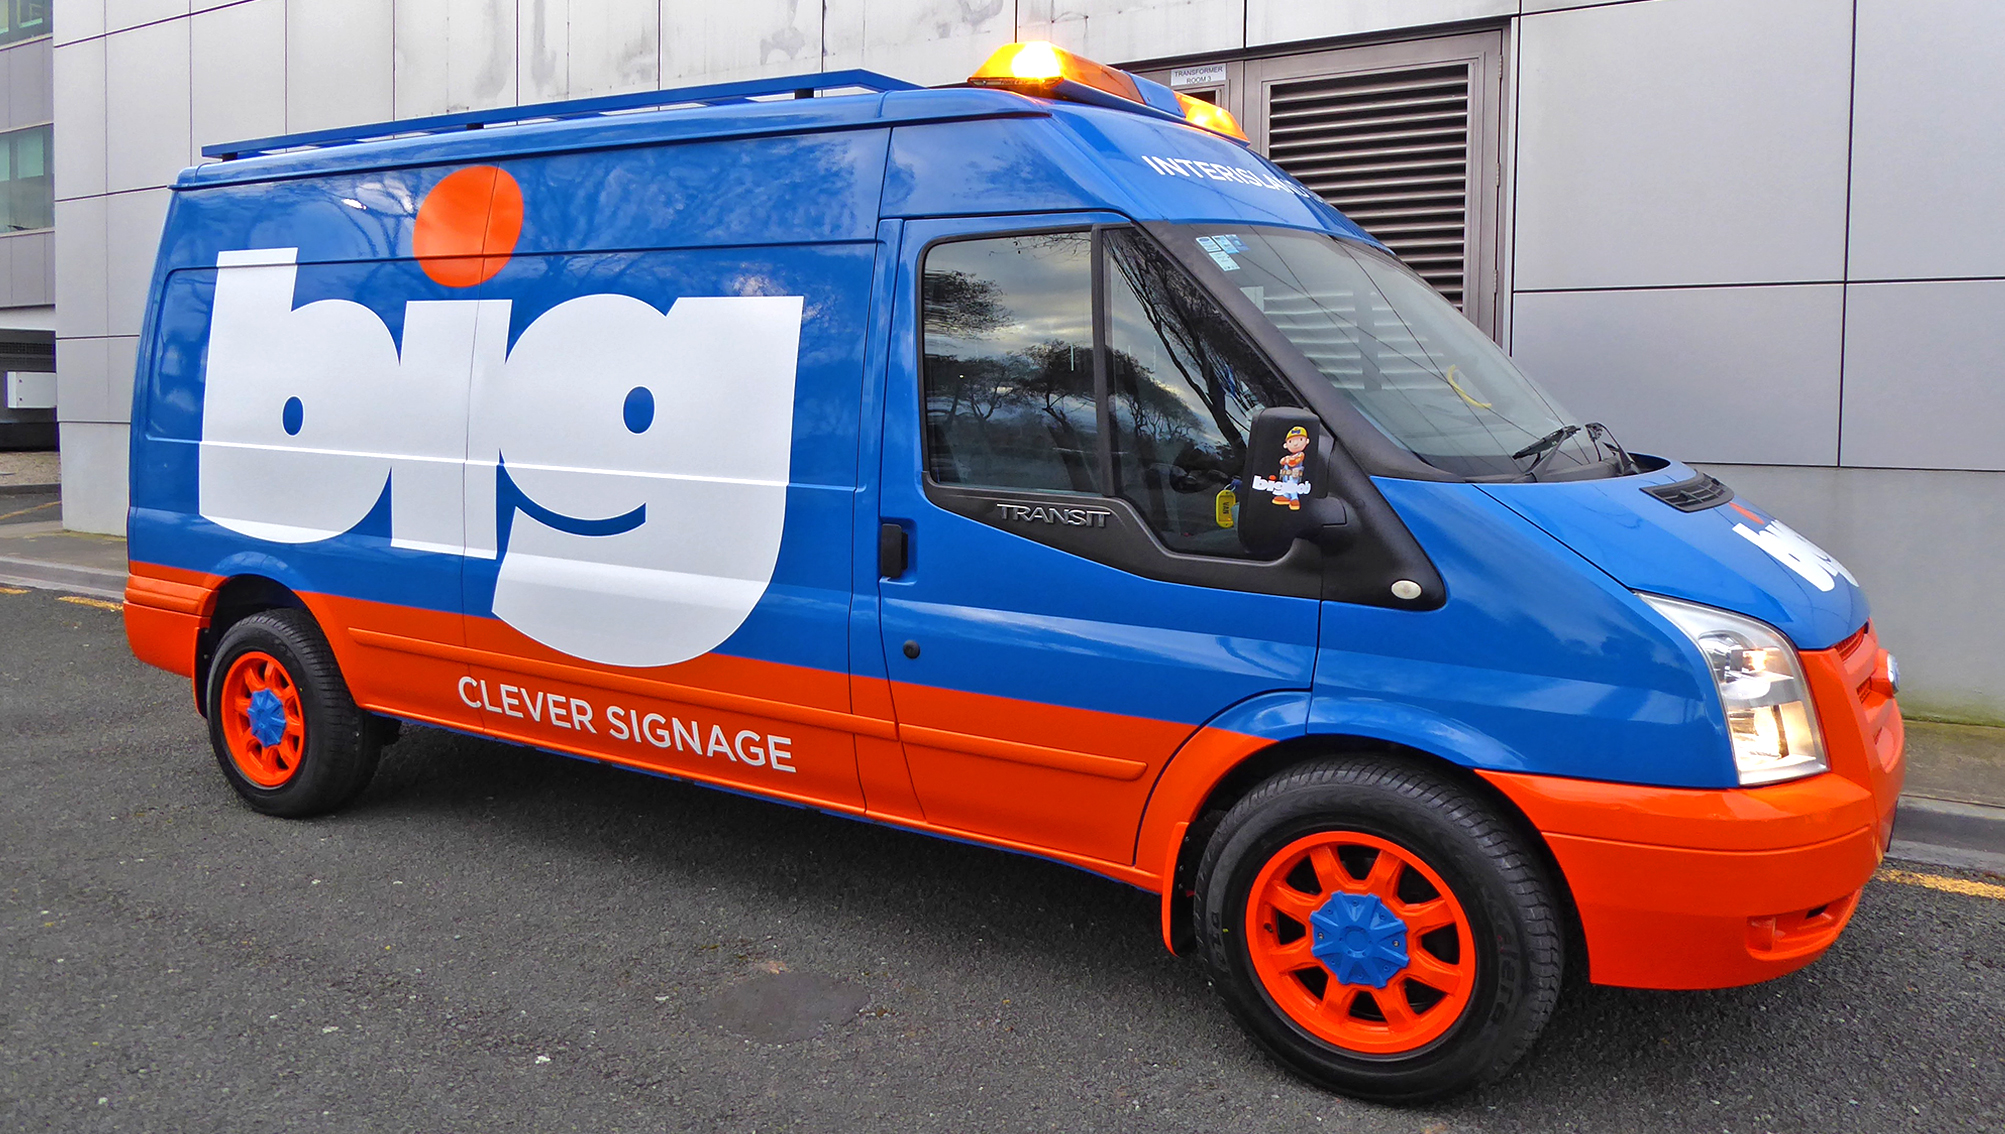 BIG Ideas - Clever Signage van covered in company livery